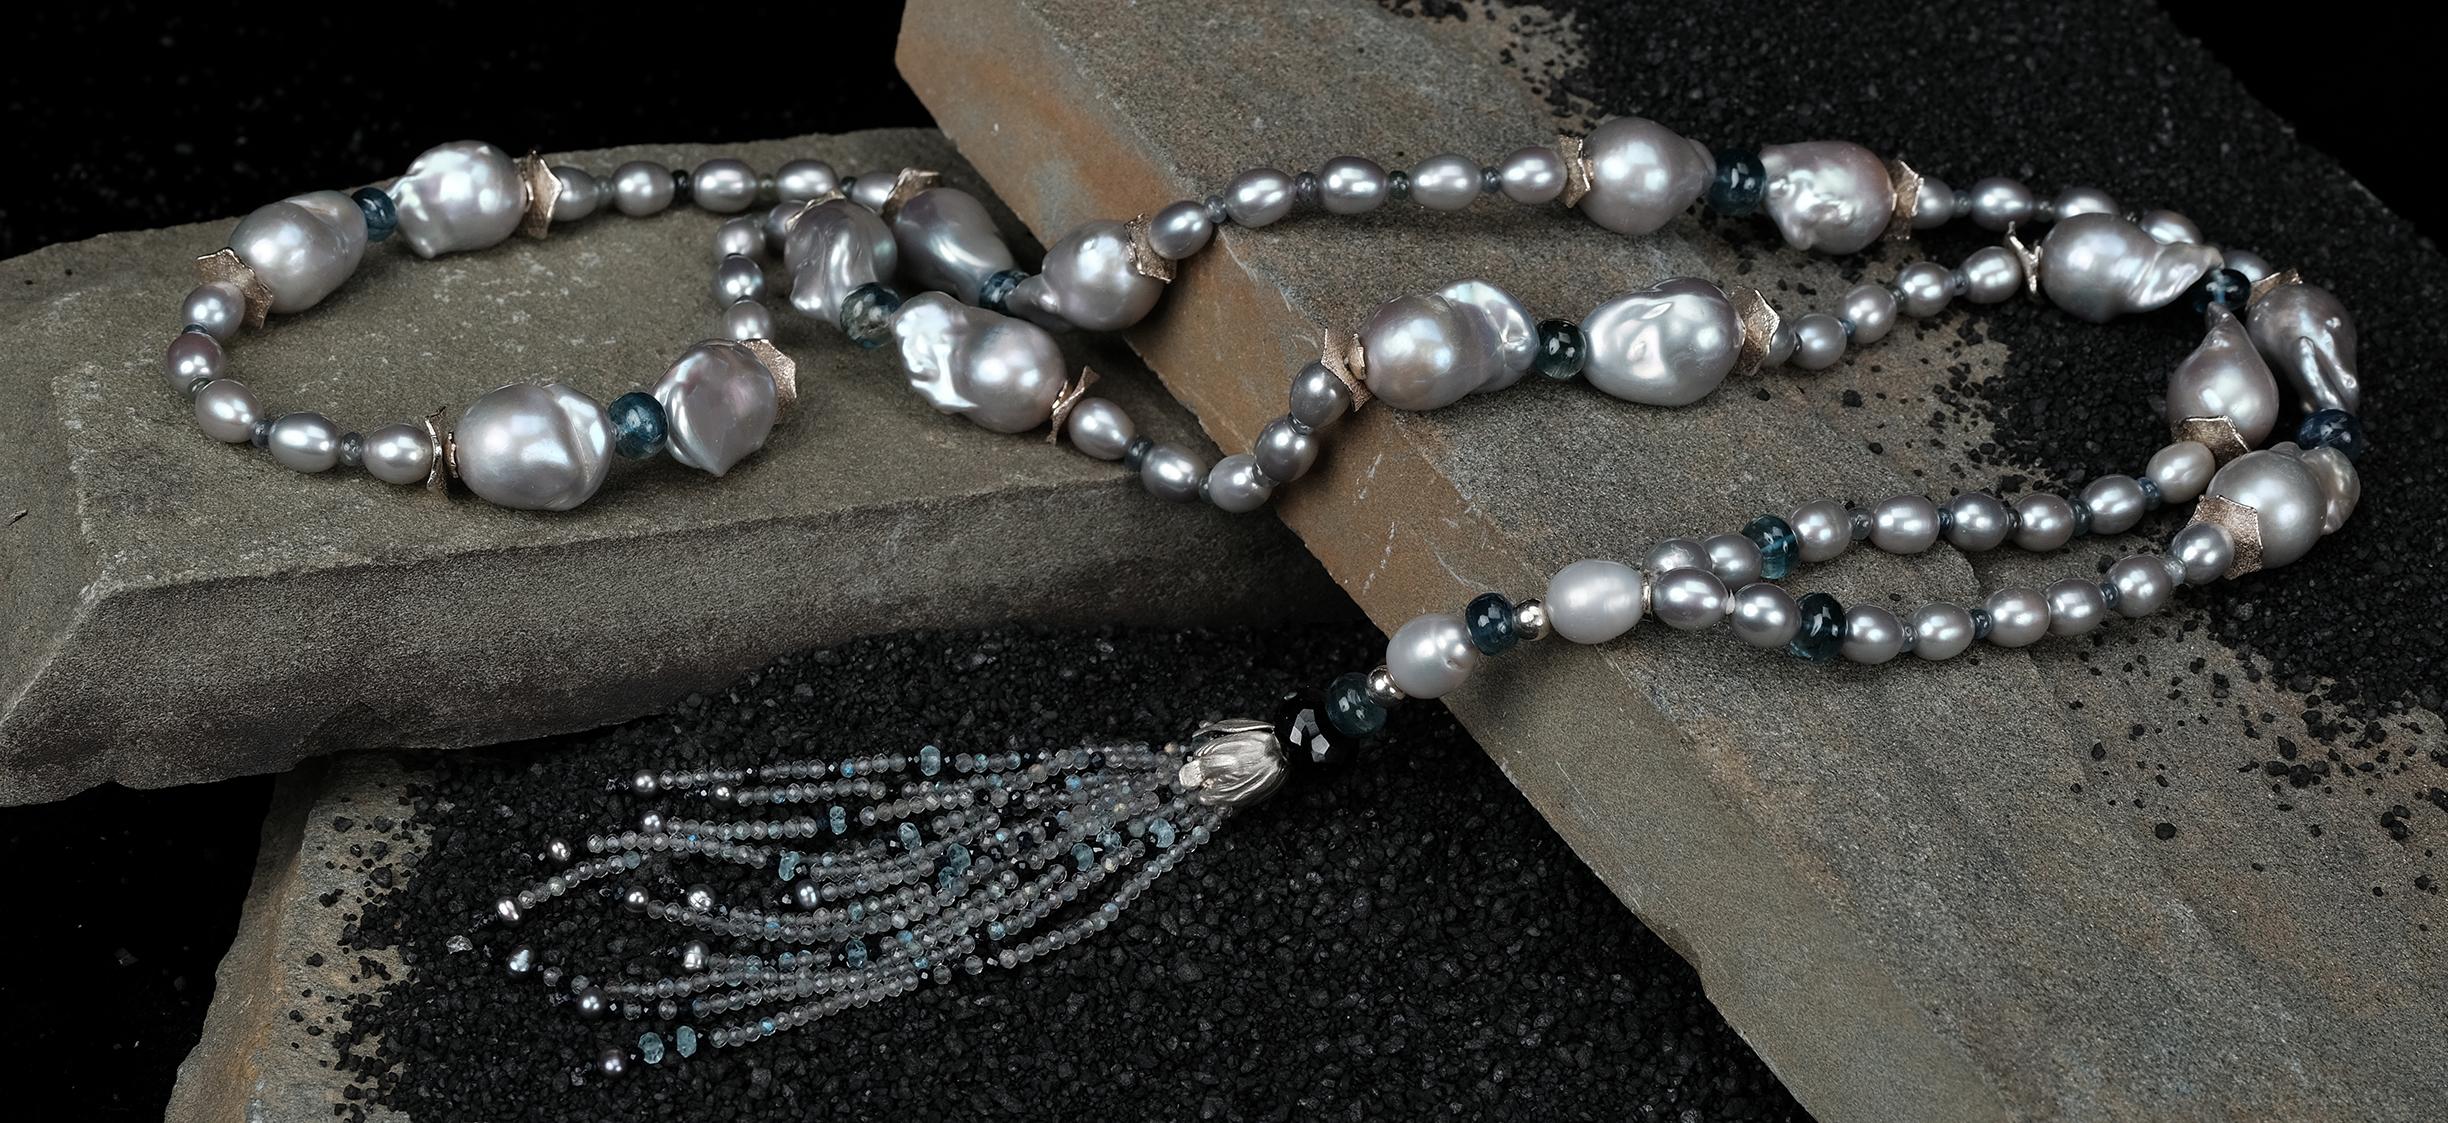 This pearl, kyanite, sapphire, topaz, and silver necklace-called a sautoir in French-continues a cherished tradition. Centuries ago sautoirs incorporated royal insignia into celebrations. Pearls were especially honored. Coco Chanel modernized the